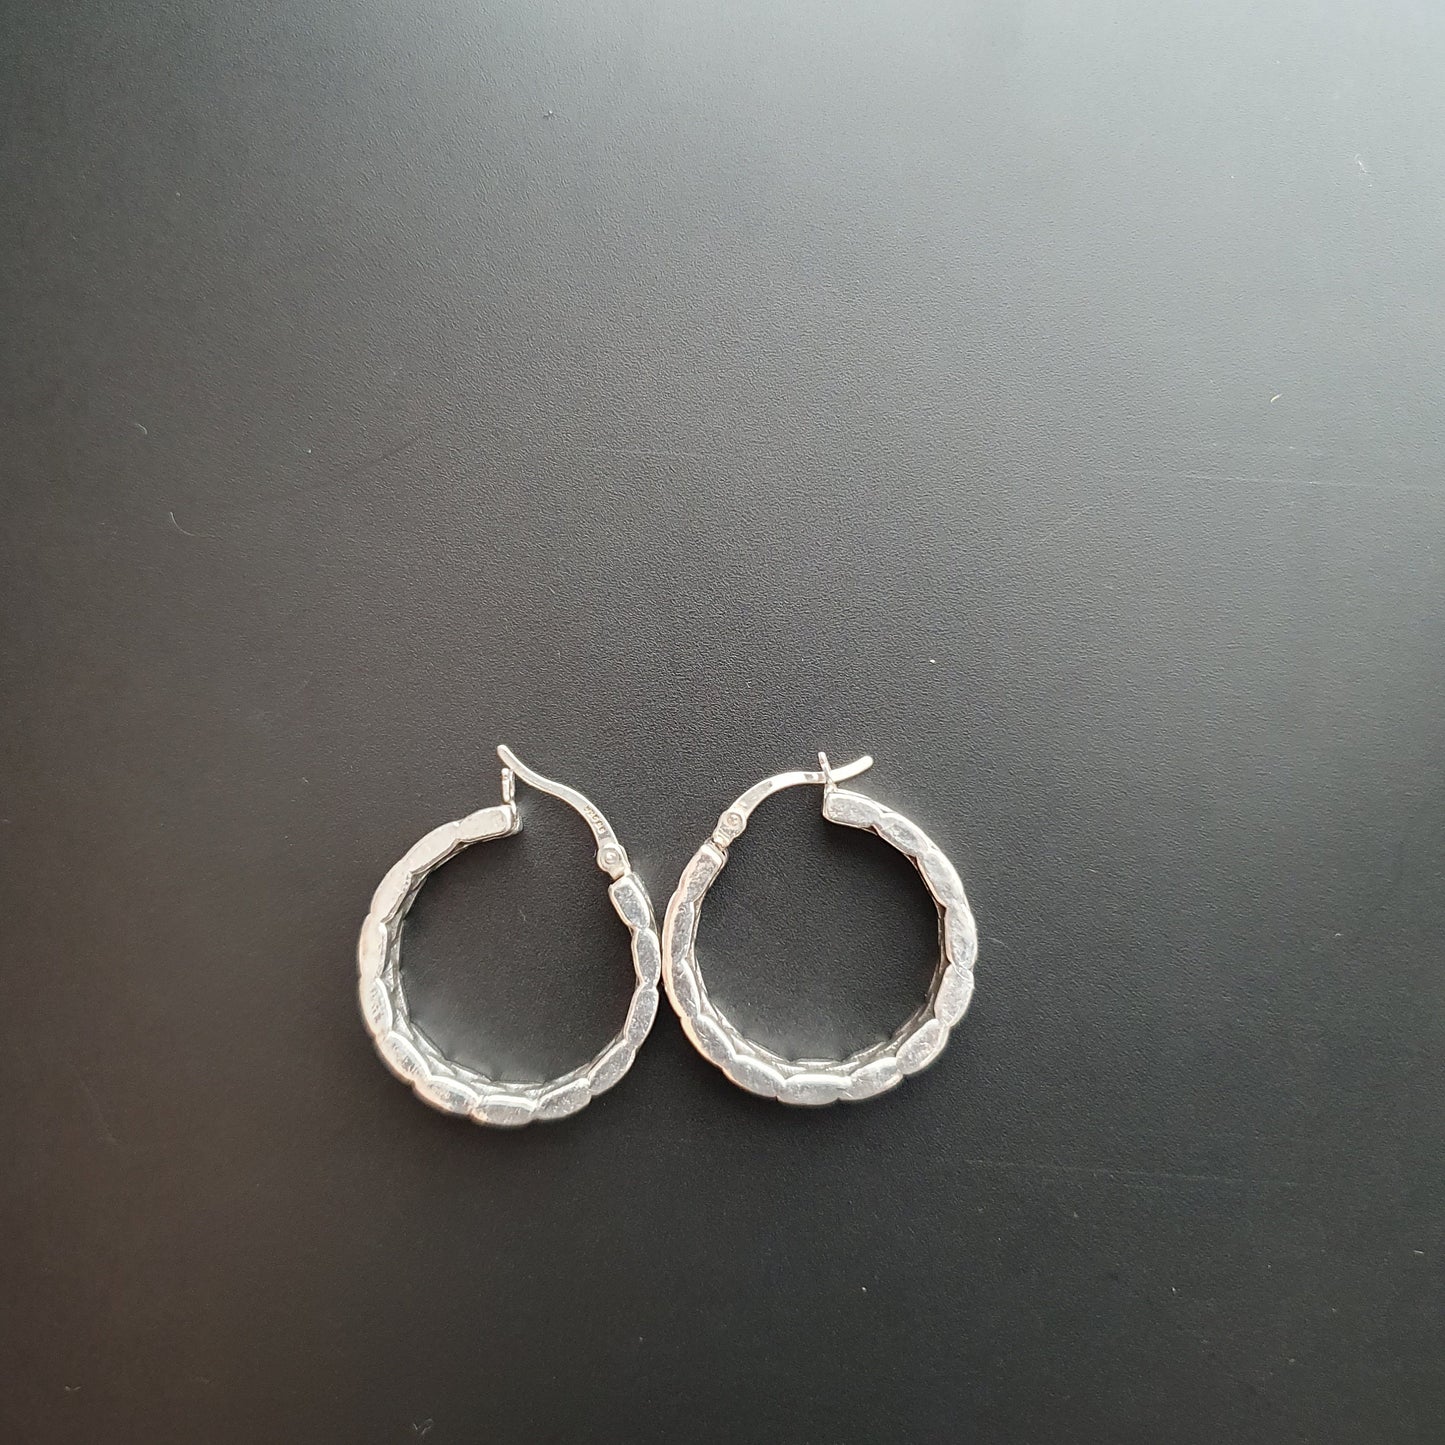 Hoops,Abstract earrings,tyre,textured,abstract jewelry,statement earrings, sterling silver earrings,925, gifts, brick,modernist jewelry,